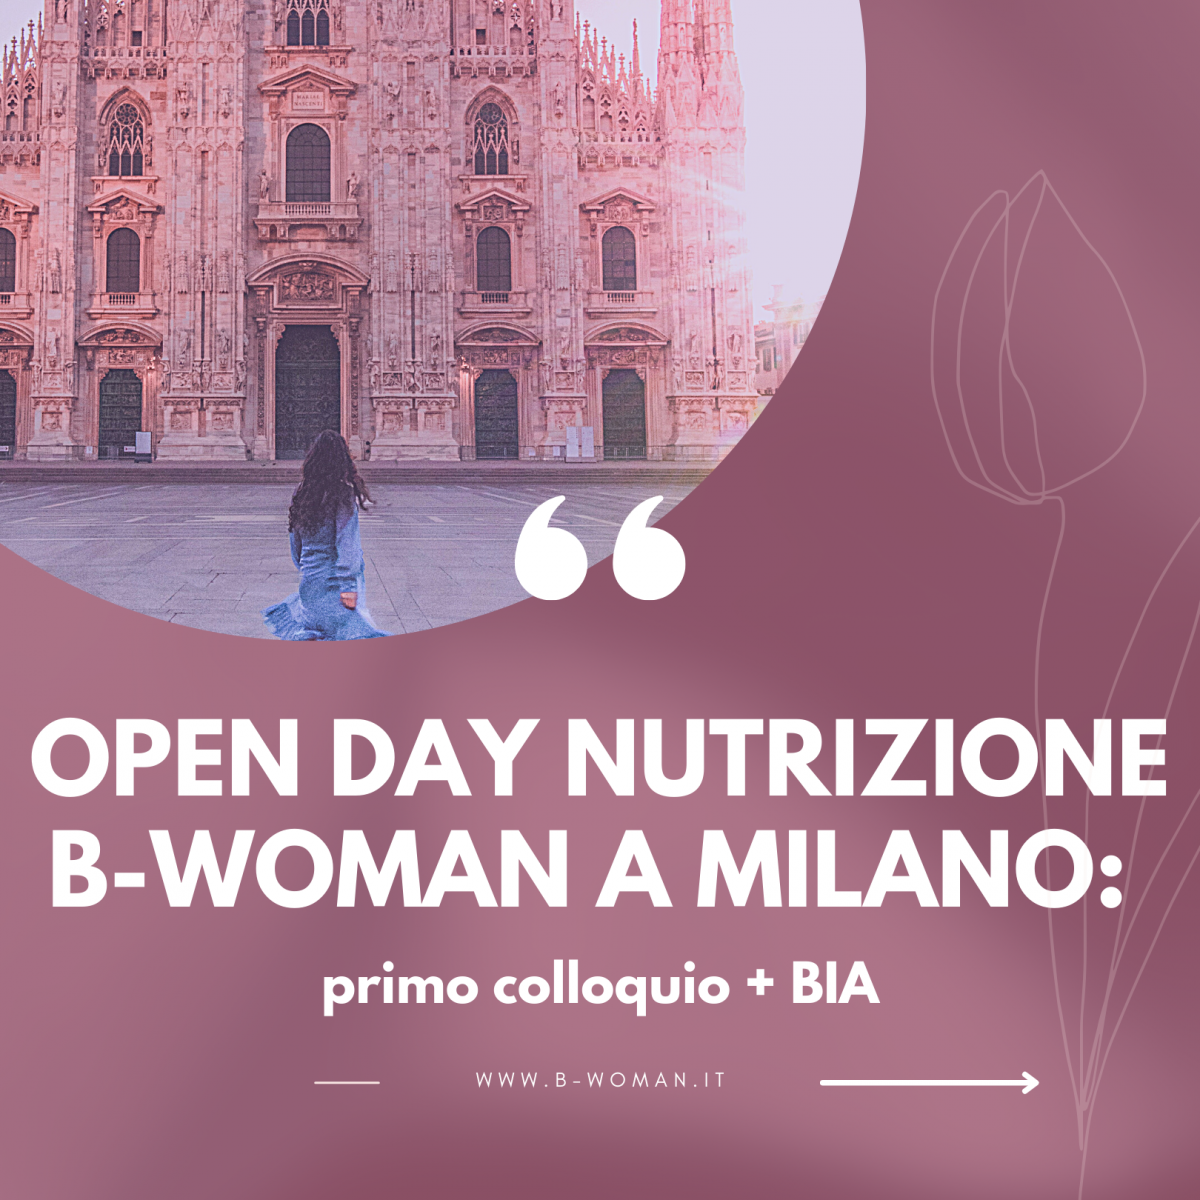 Open-Day-B-woman-apre-anche-a-Milano--1200x1200.png